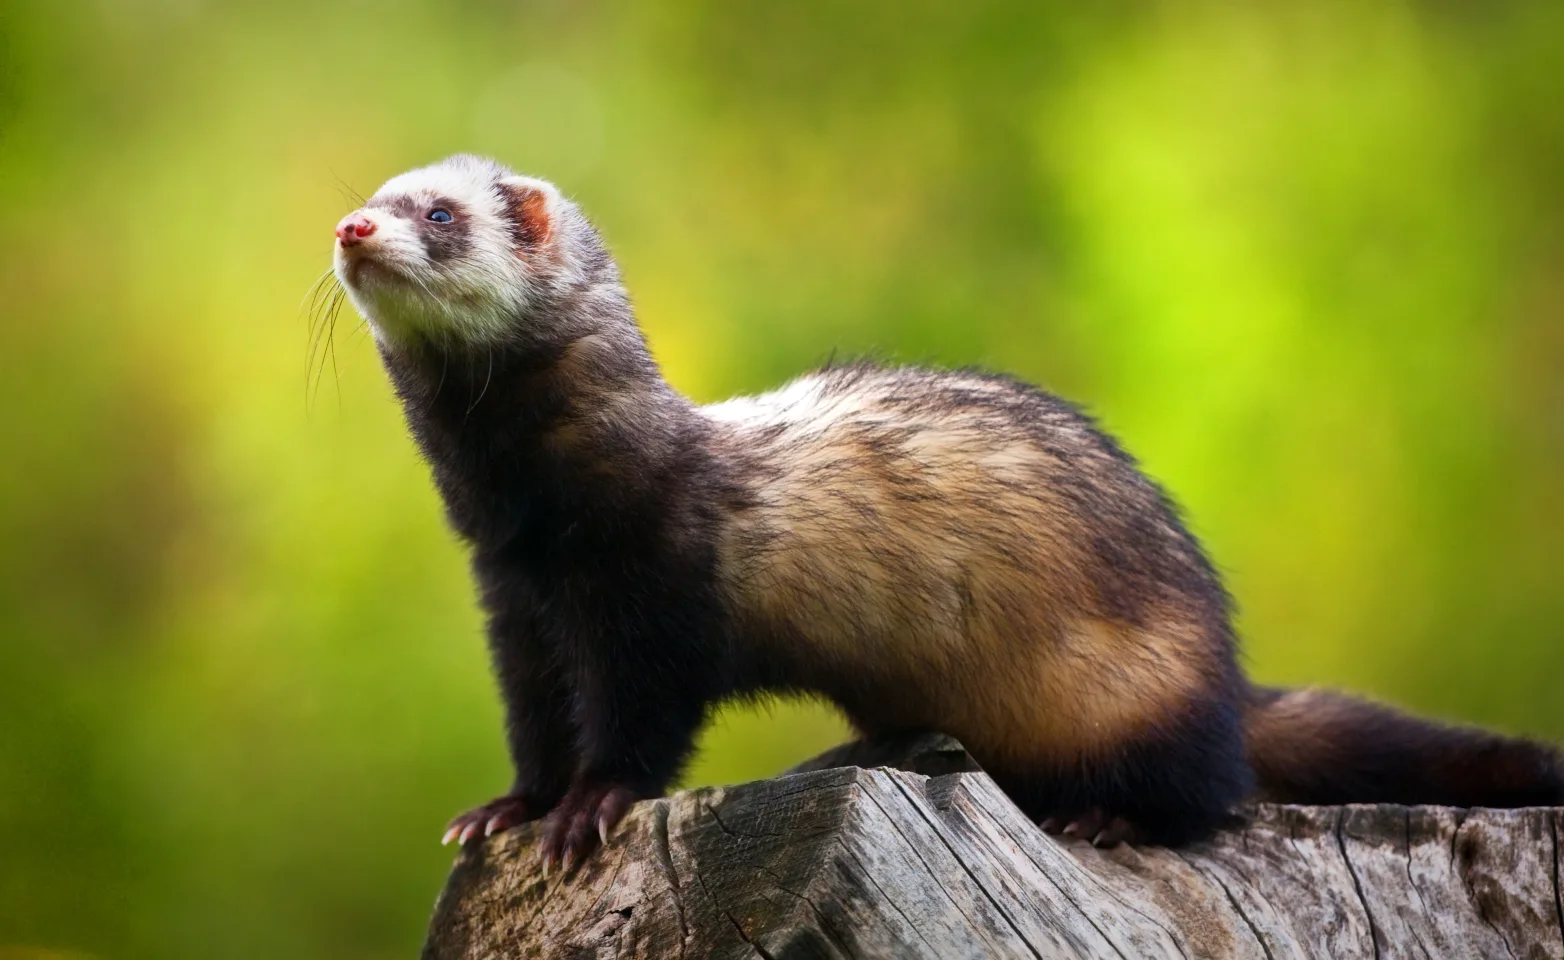 Ferret standing on wood with green background